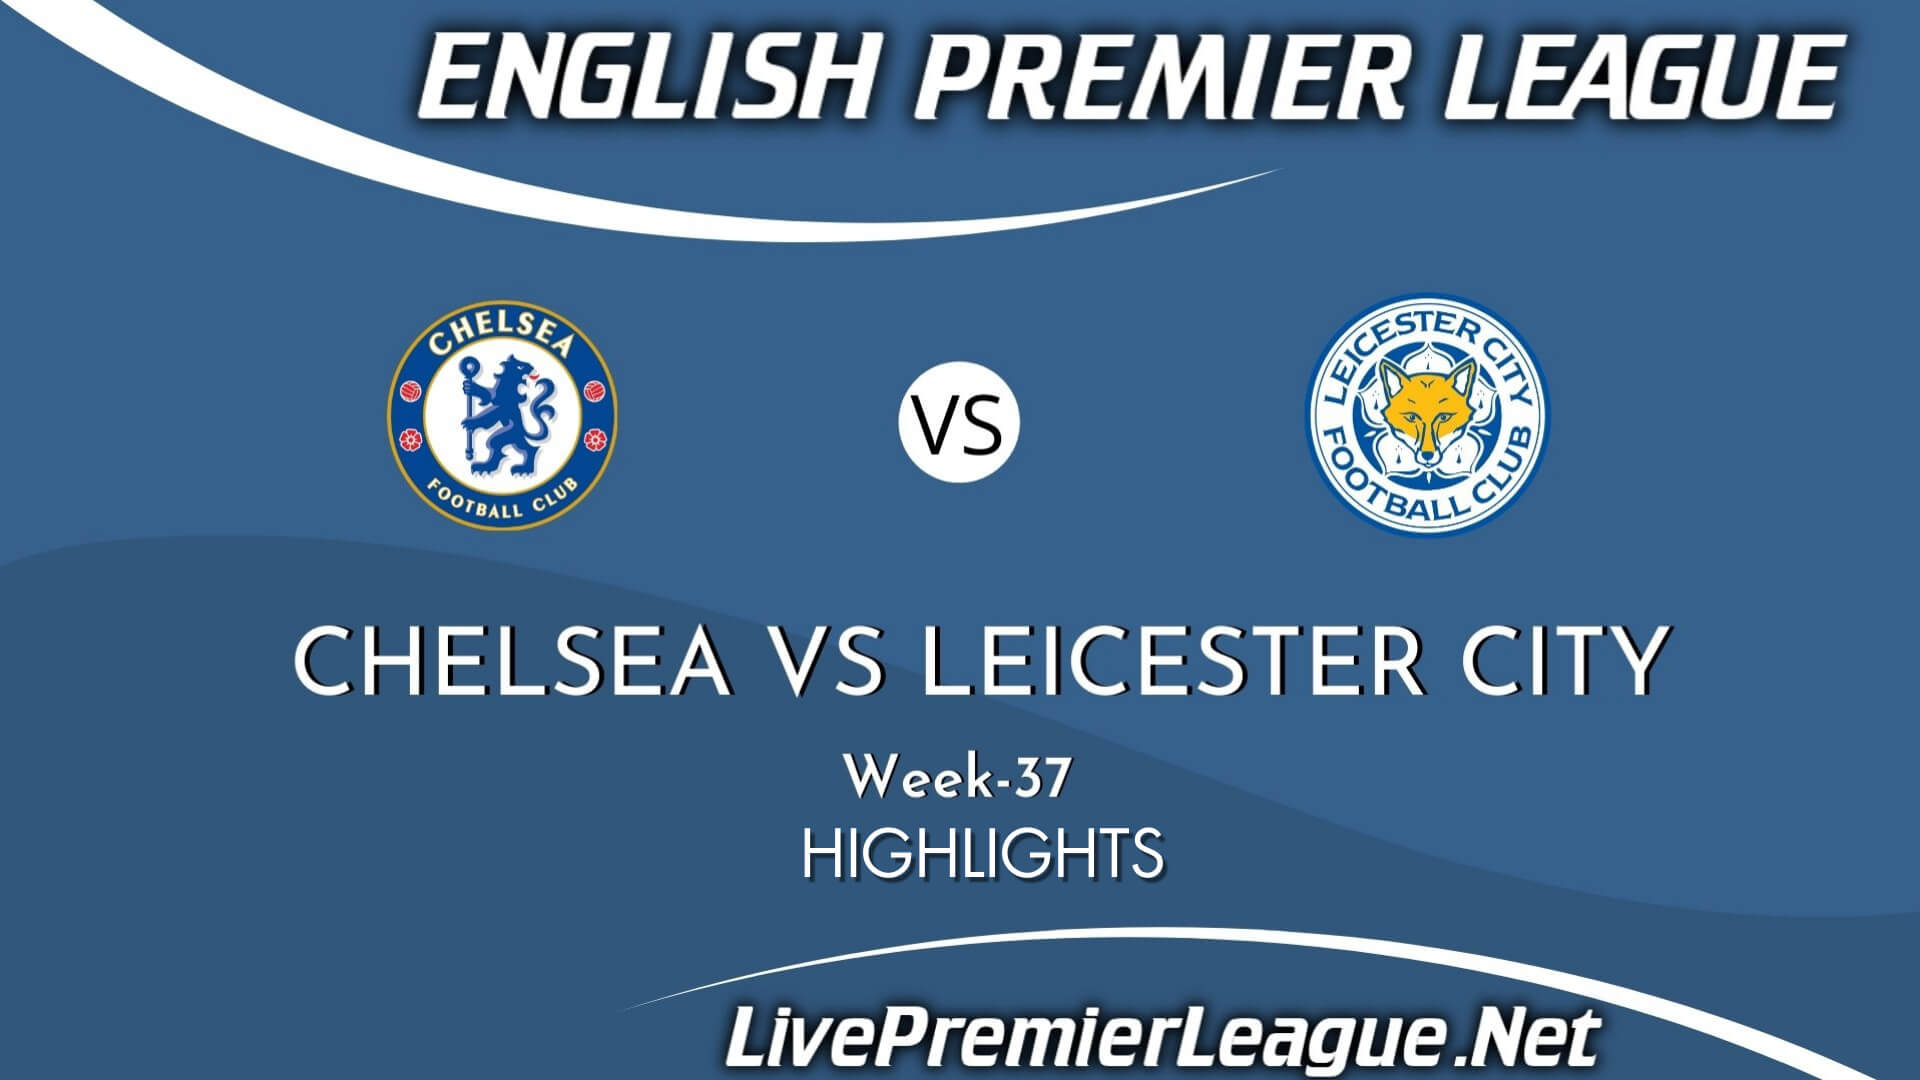 Chelsea Vs Leicester City Highlights 2021 Week 37